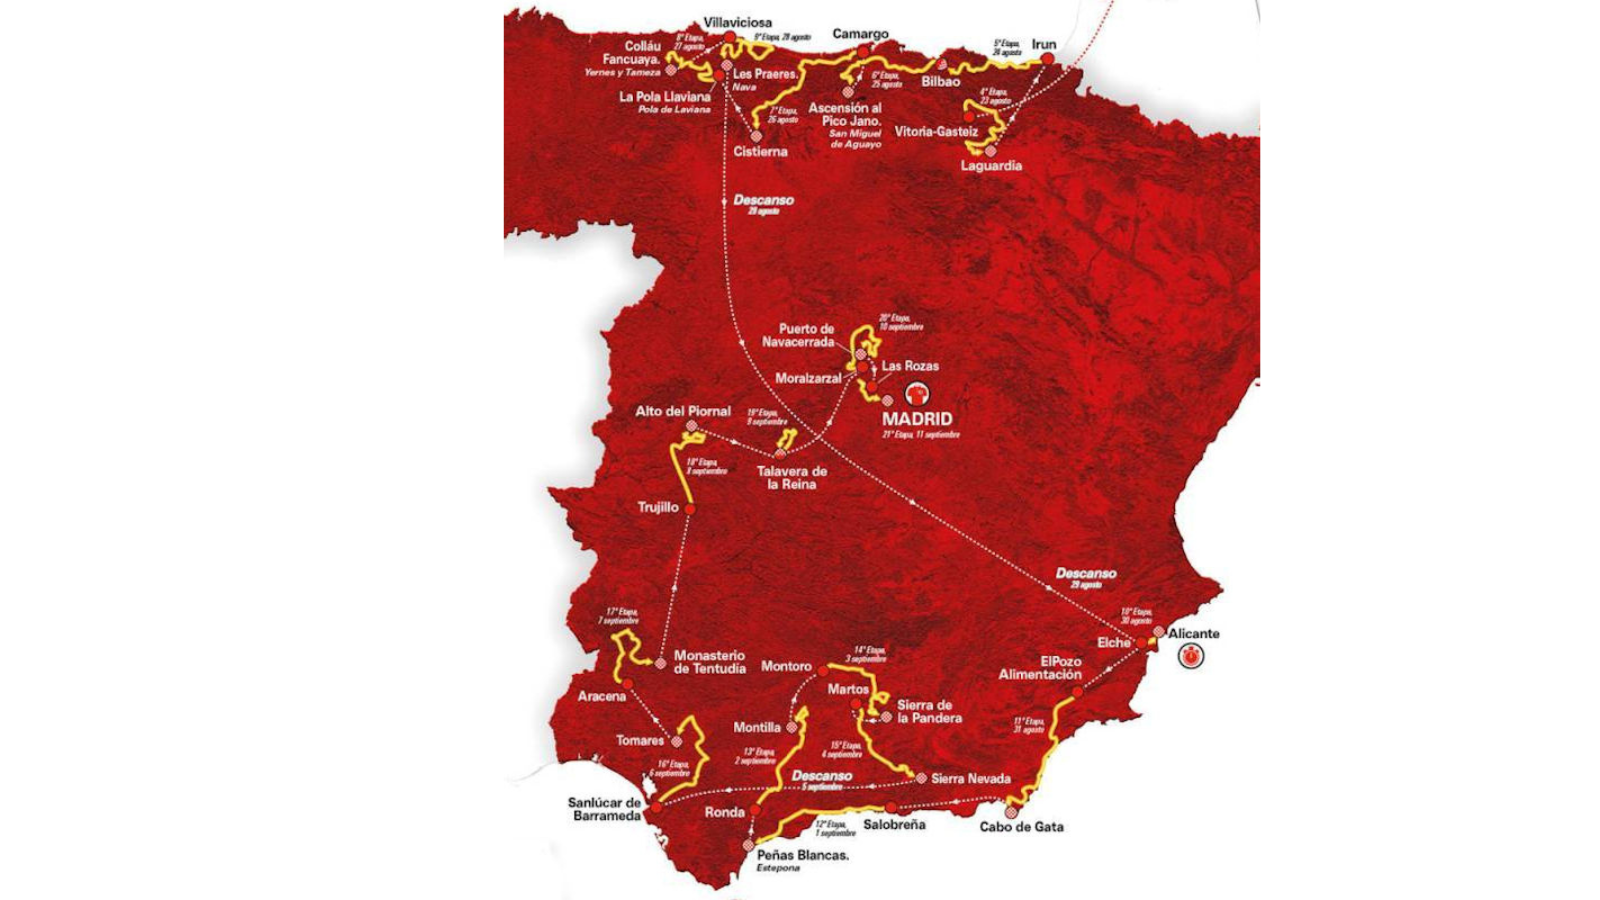 La Vuelta 2022 starts on 19th August in the Netherlands